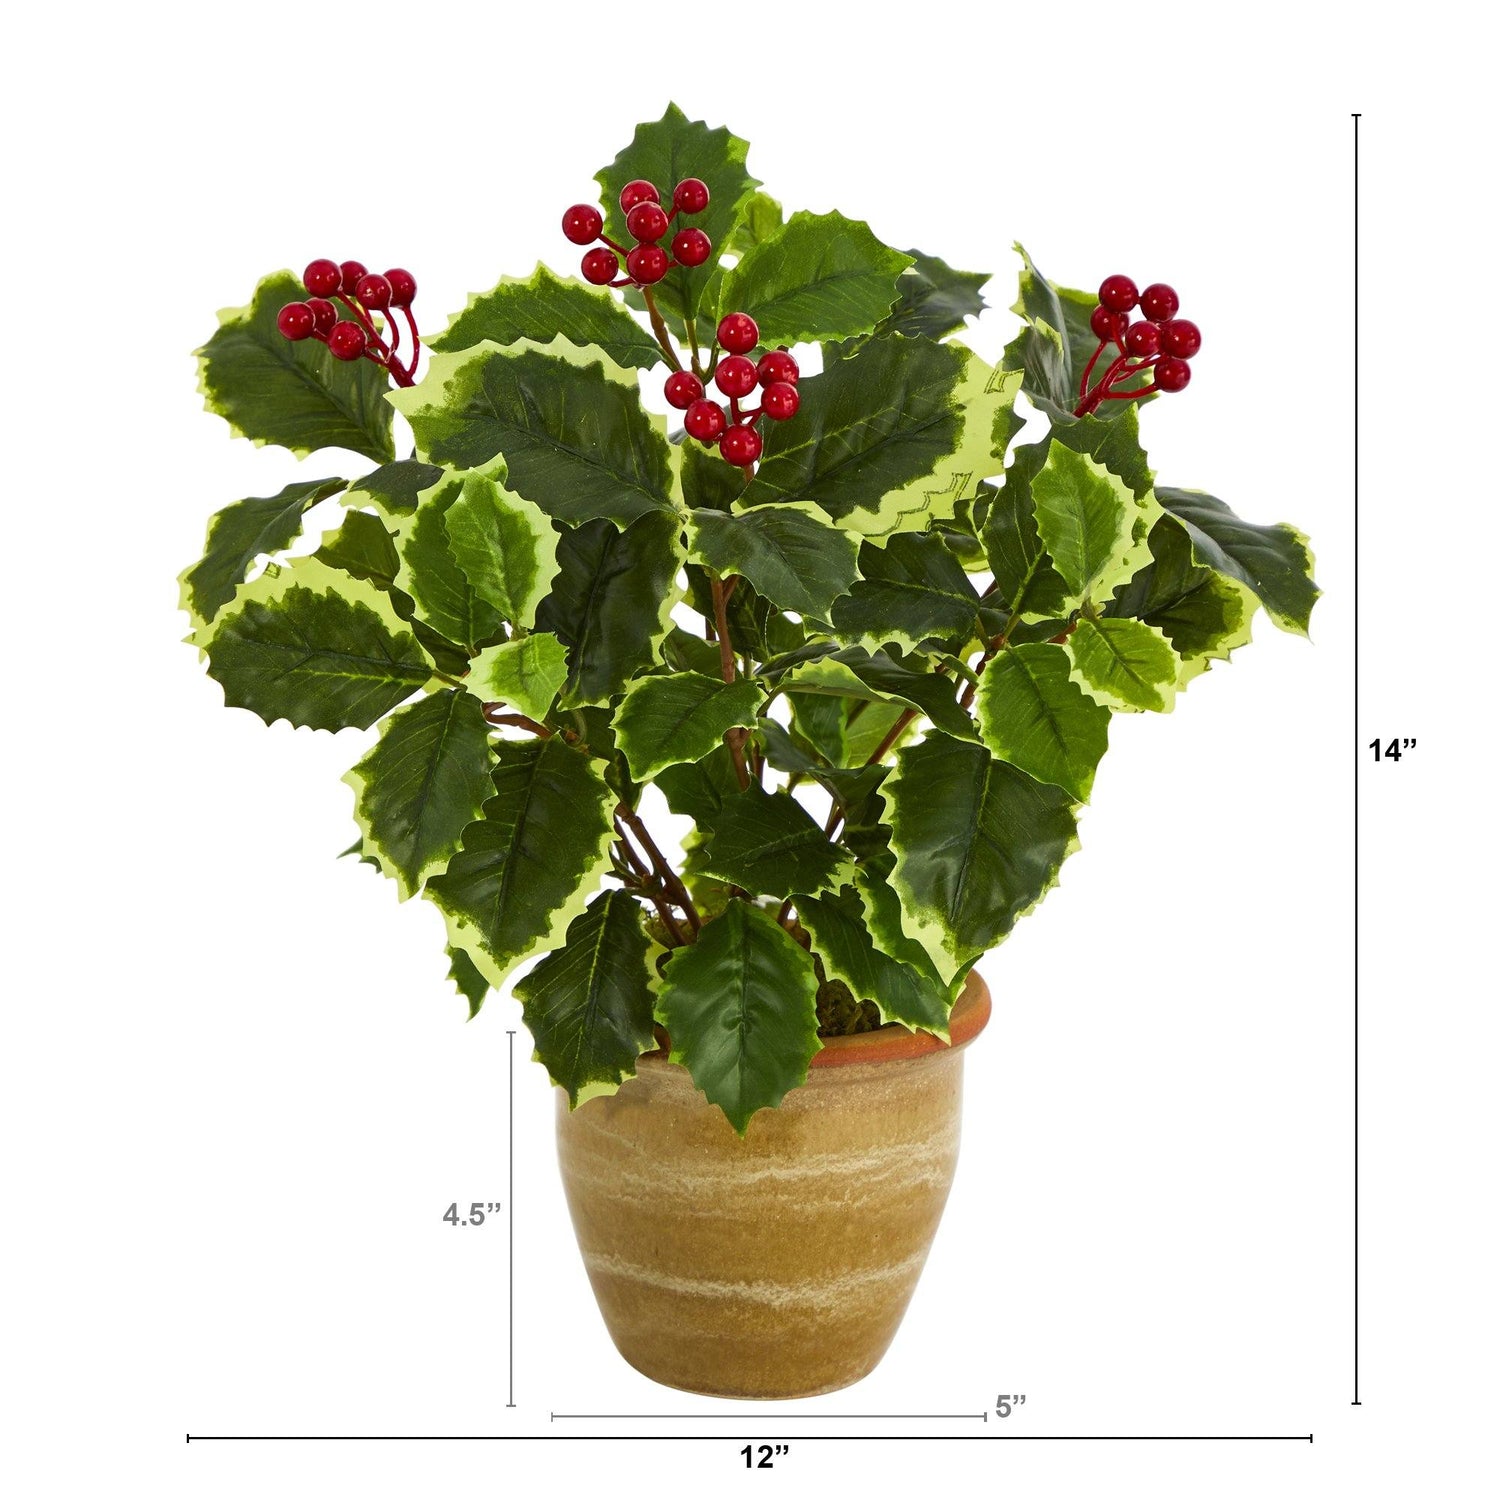 14” Variegated Holly Leaf Artificial Plant in Ceramic Planter (Real Touch)